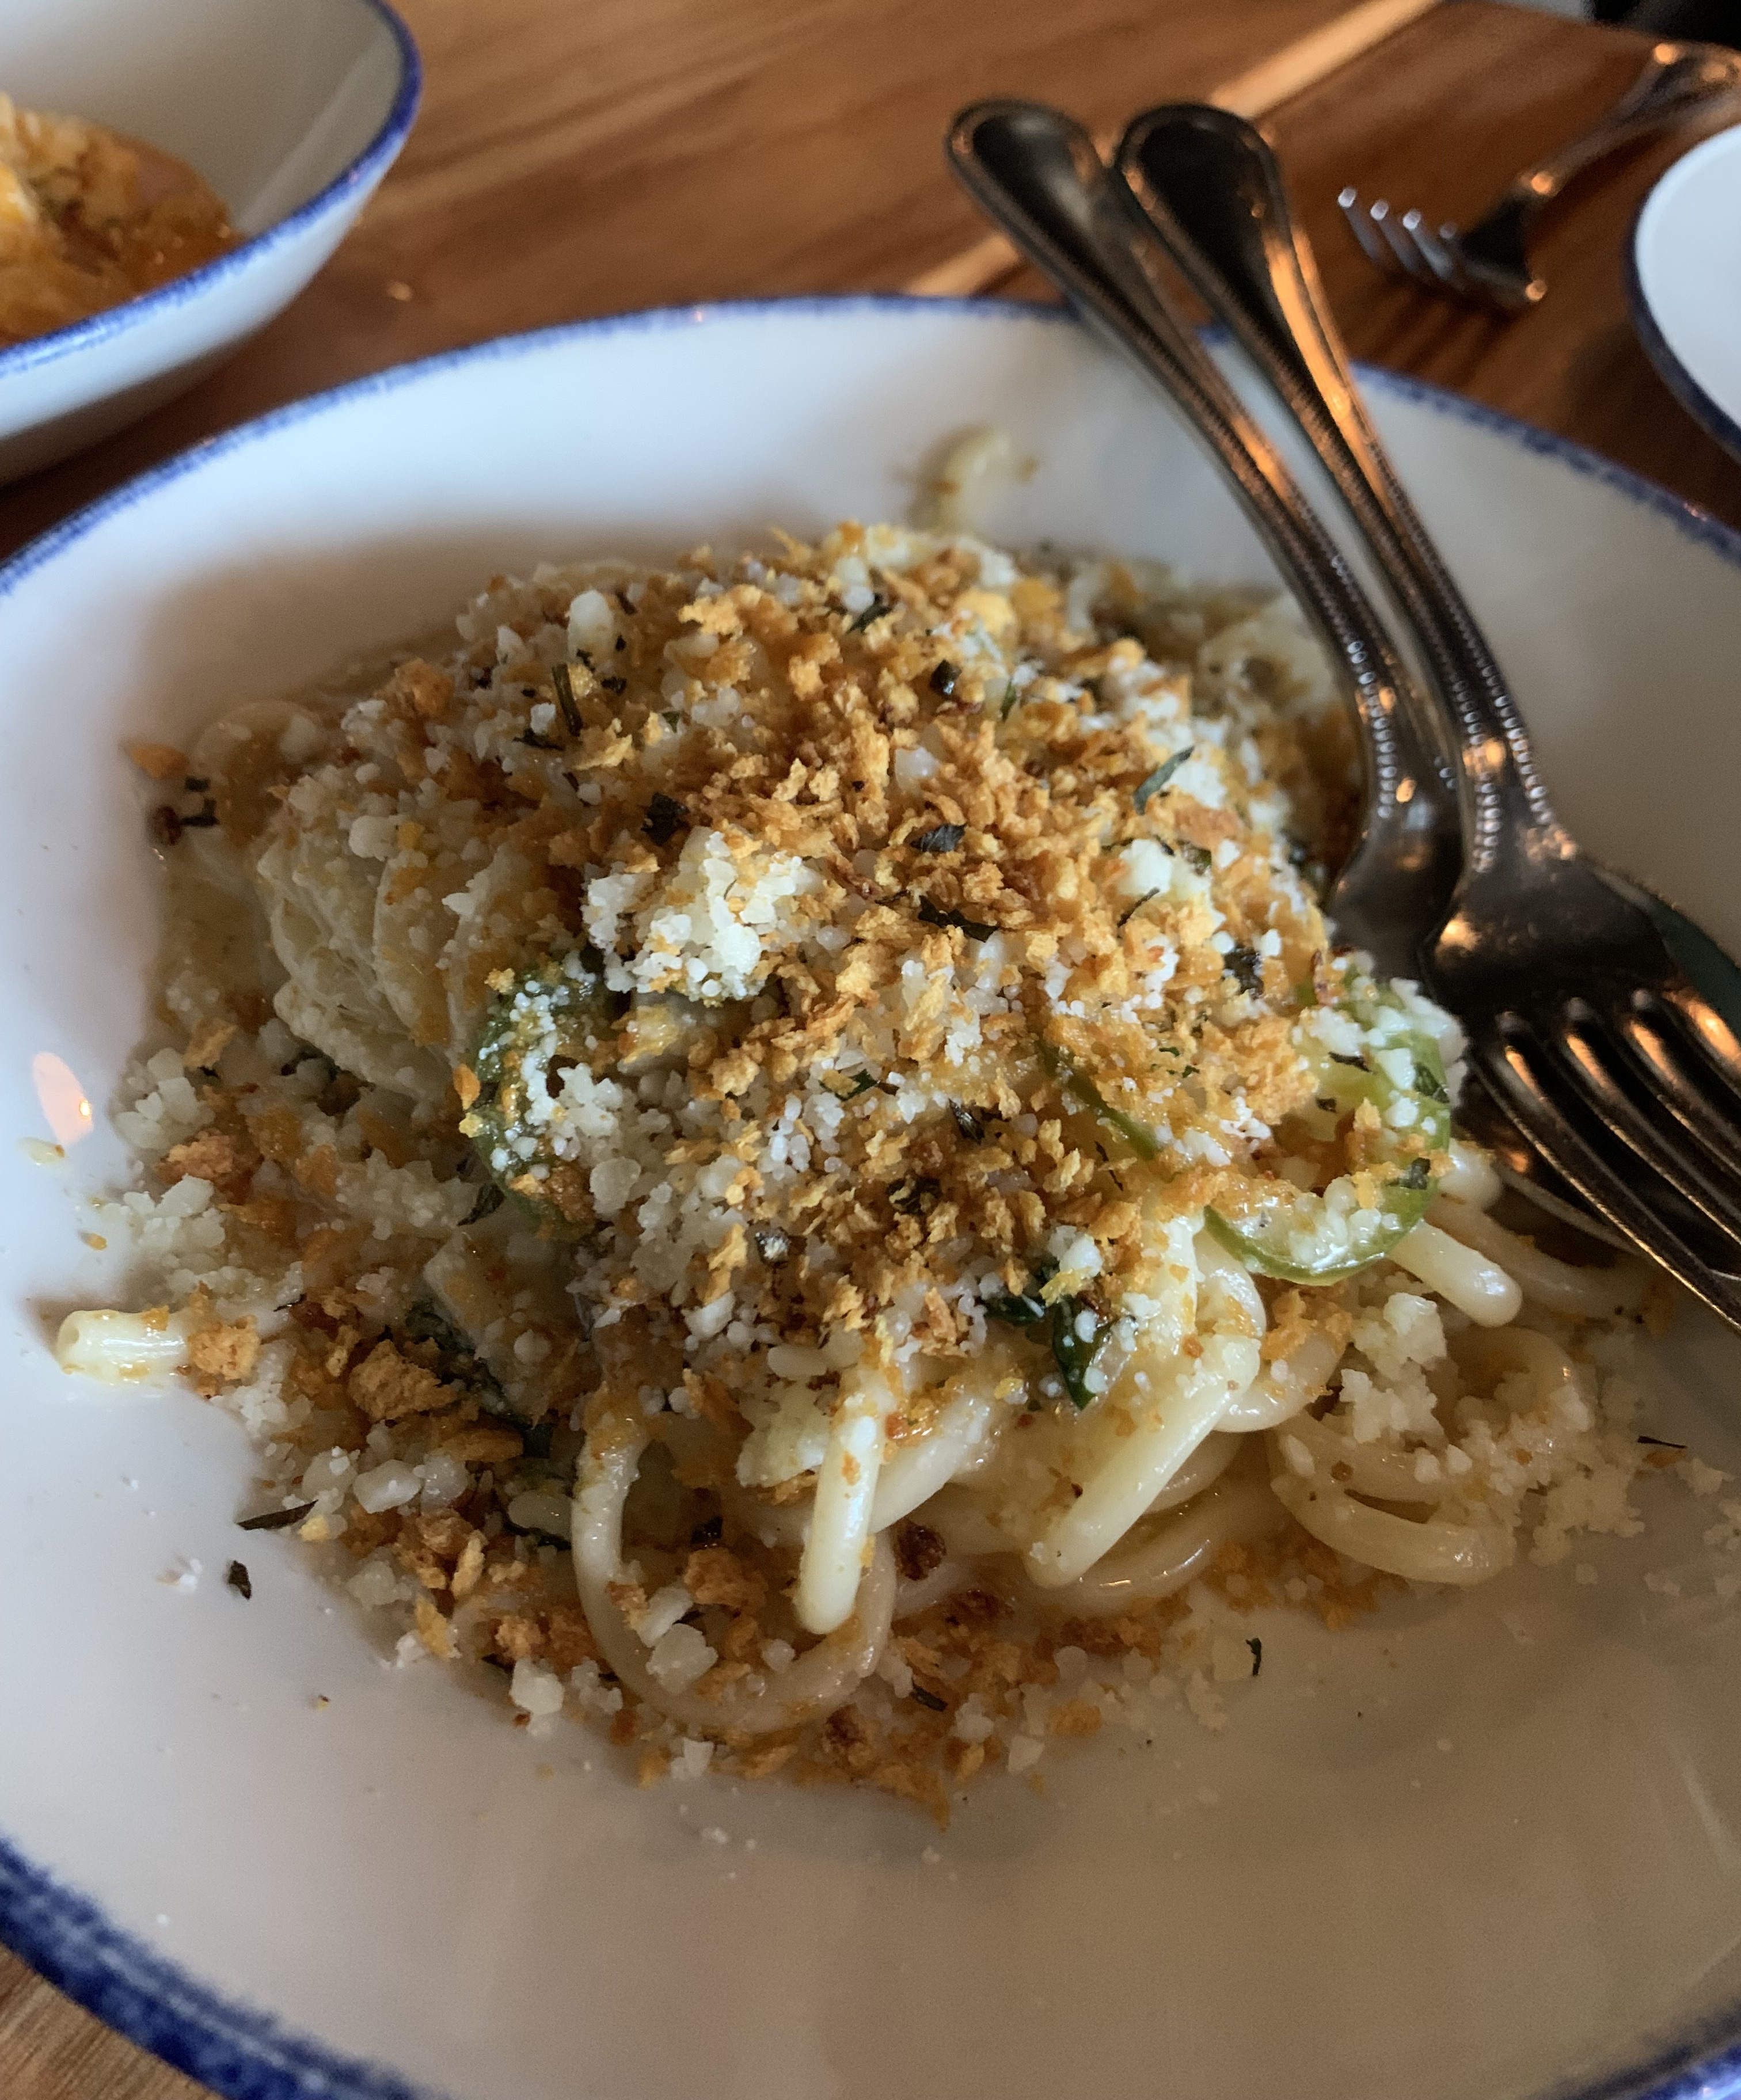 Plate of thick pasta noodles covered in crispy bits